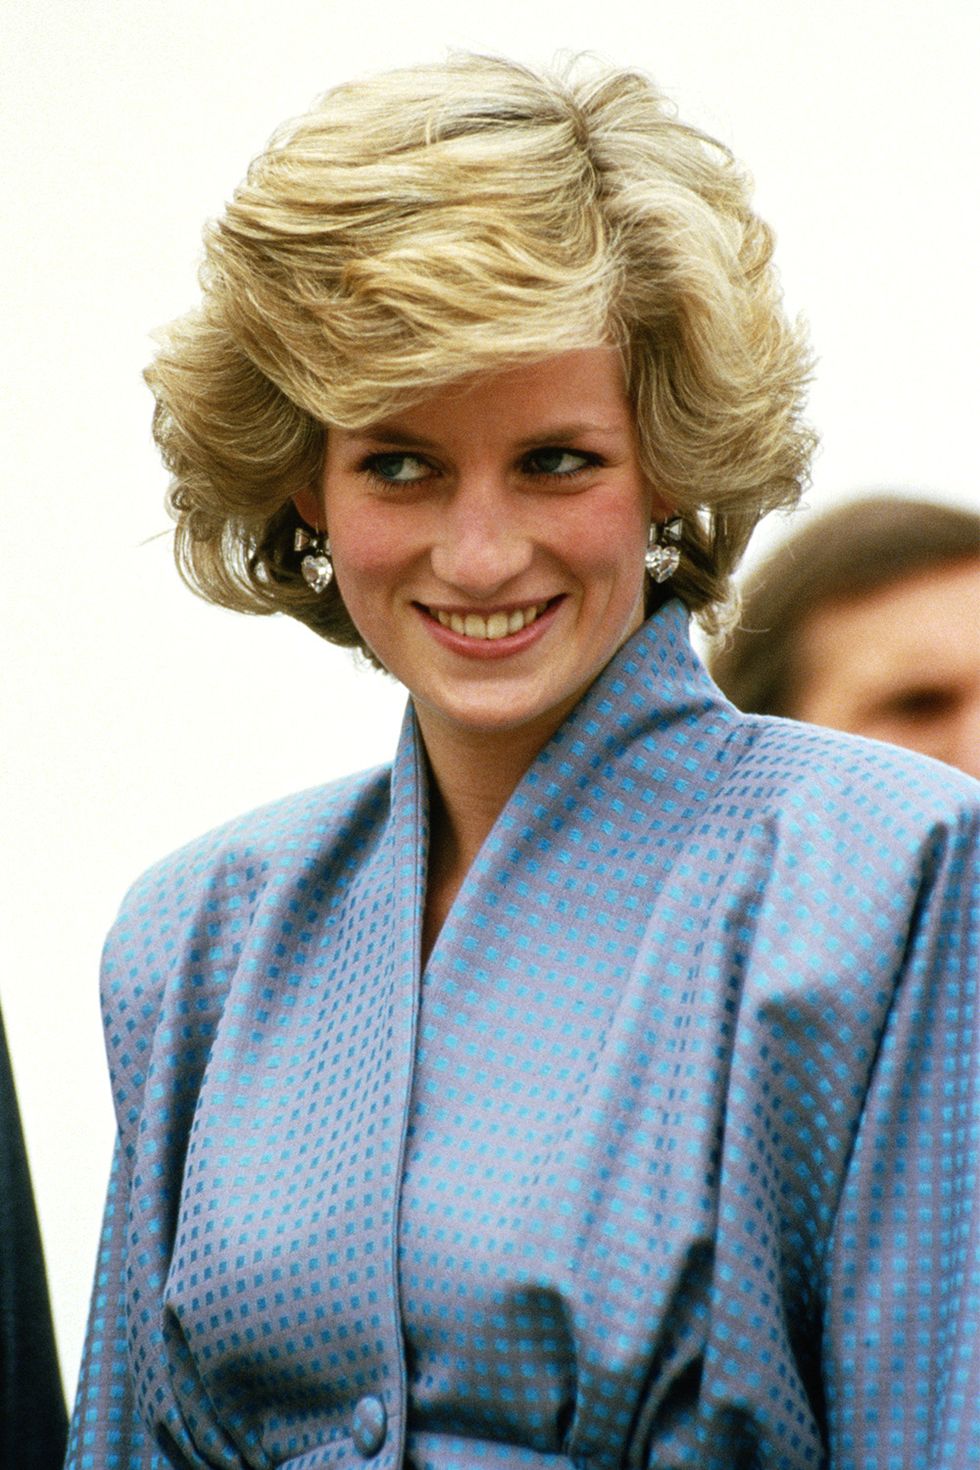 Hbz Princess Diana Hair 1985 Gettyimages 73802571 1502313843 ?crop=1xw 1xh;center,top&resize=980 *